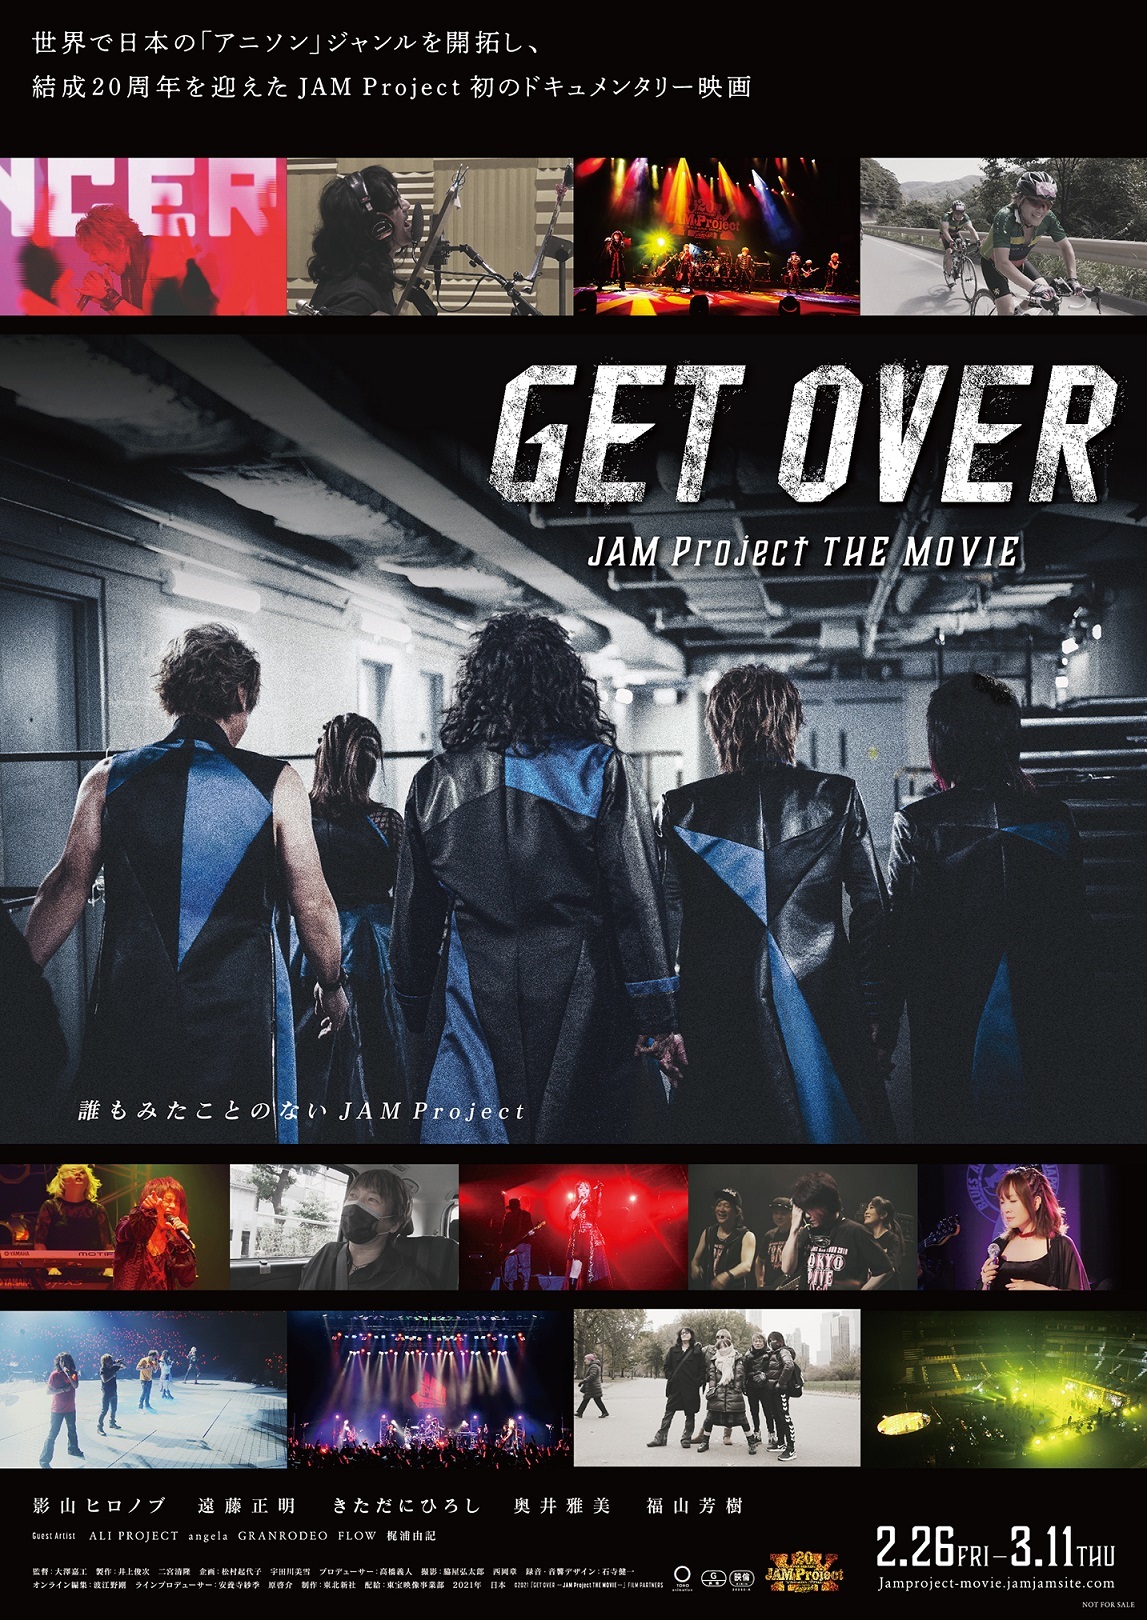 『GET OVER －JAM Project THE MOVIE－』 (C)2021「GET OVER －JAM Project THE MOVIE－」FILM PARTNERS